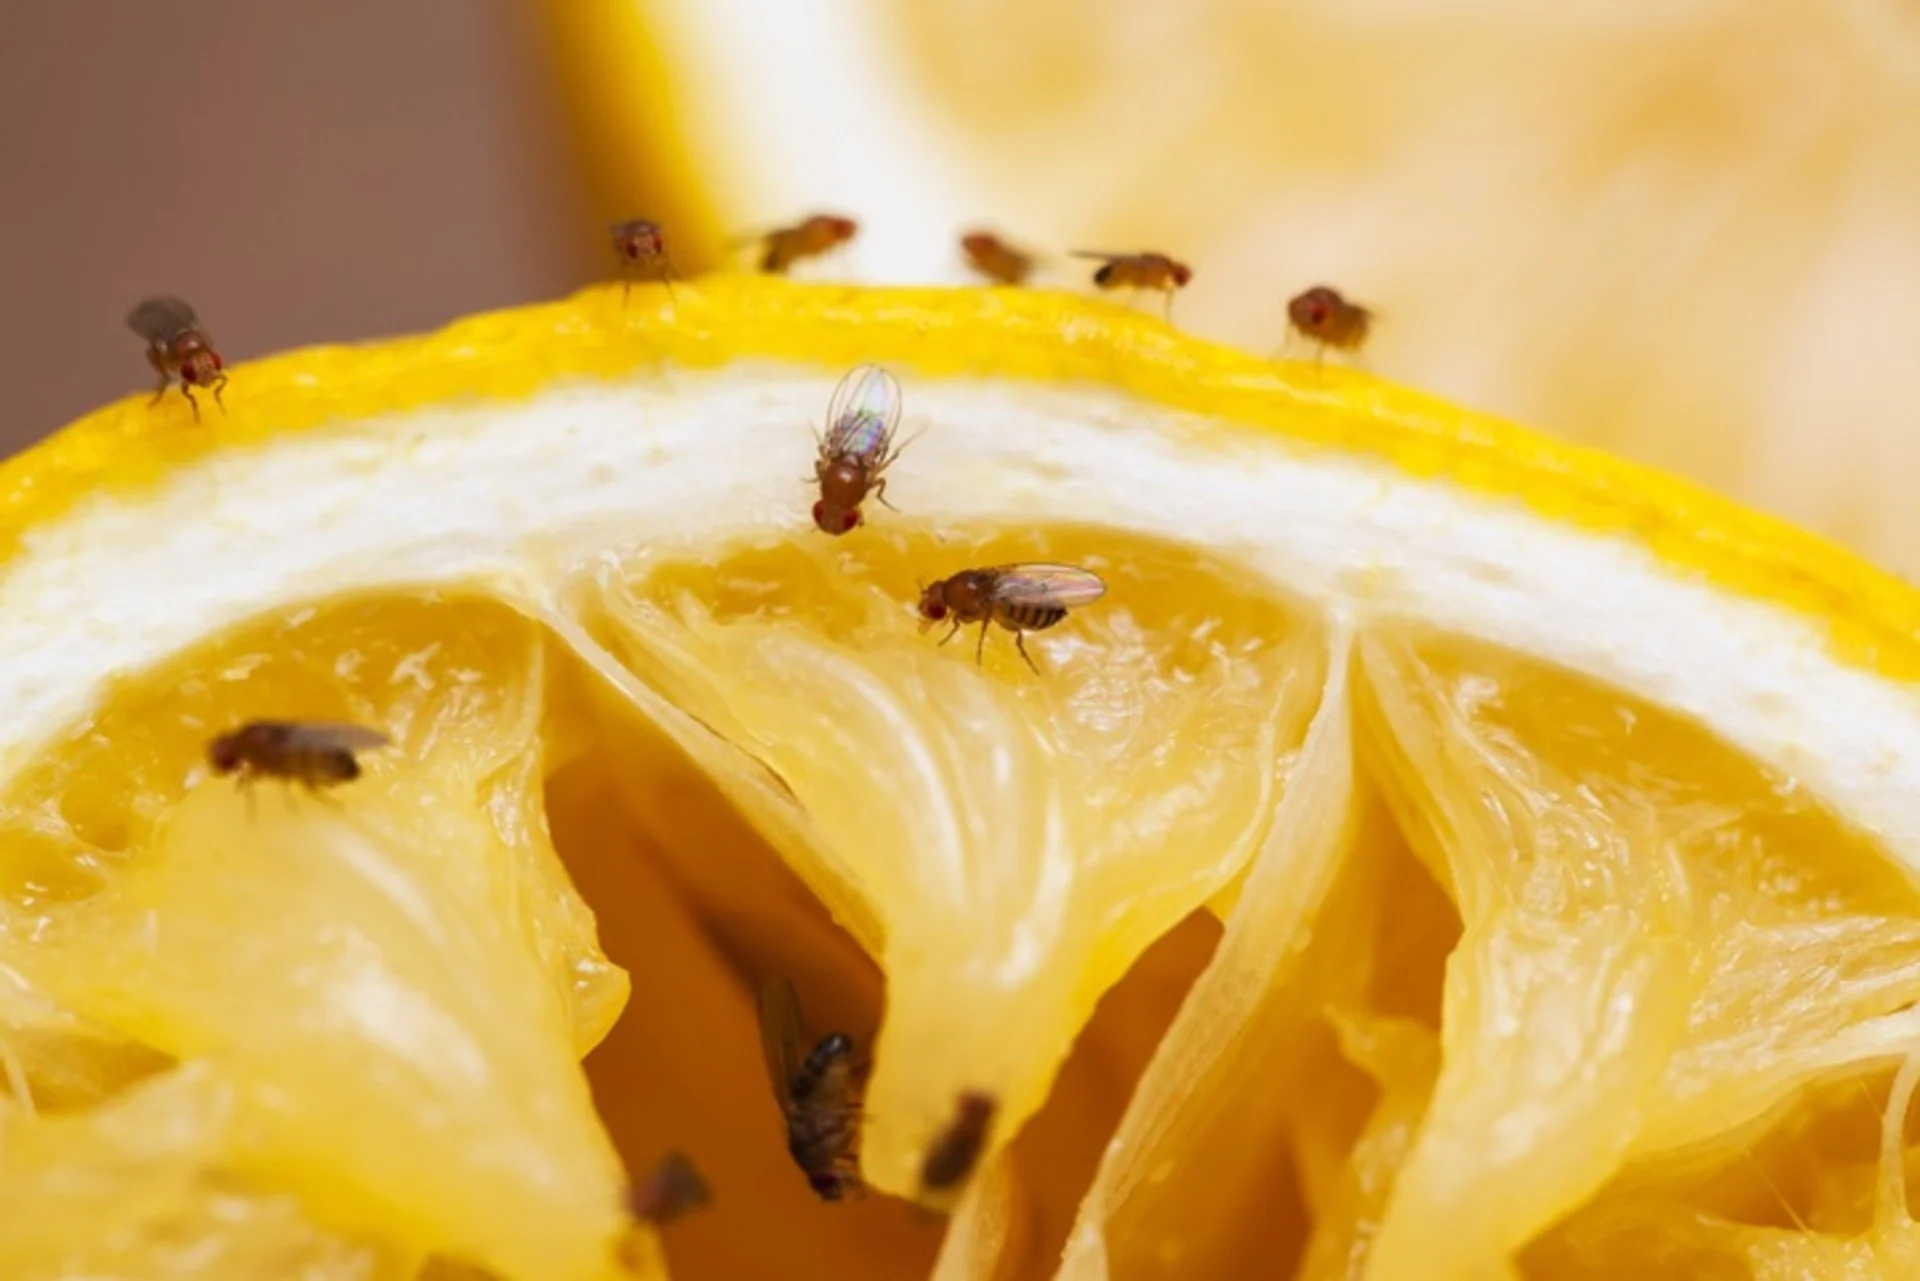 Got fruit flies? Here are six ways to get rid of them